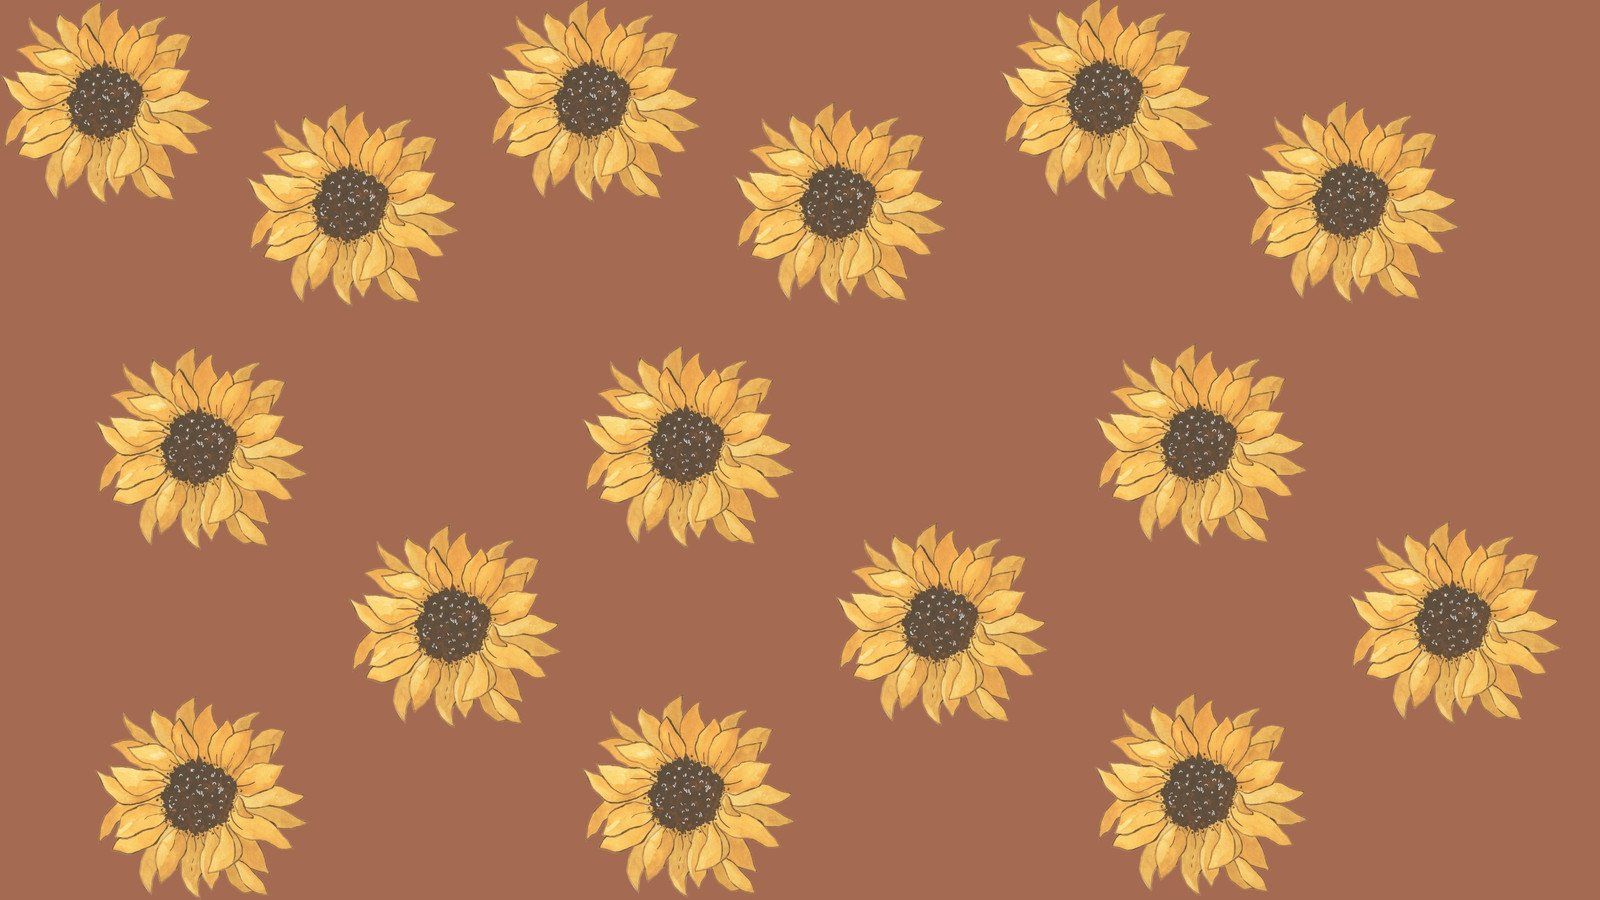 A pattern of sunflowers on brown background - Sunflower